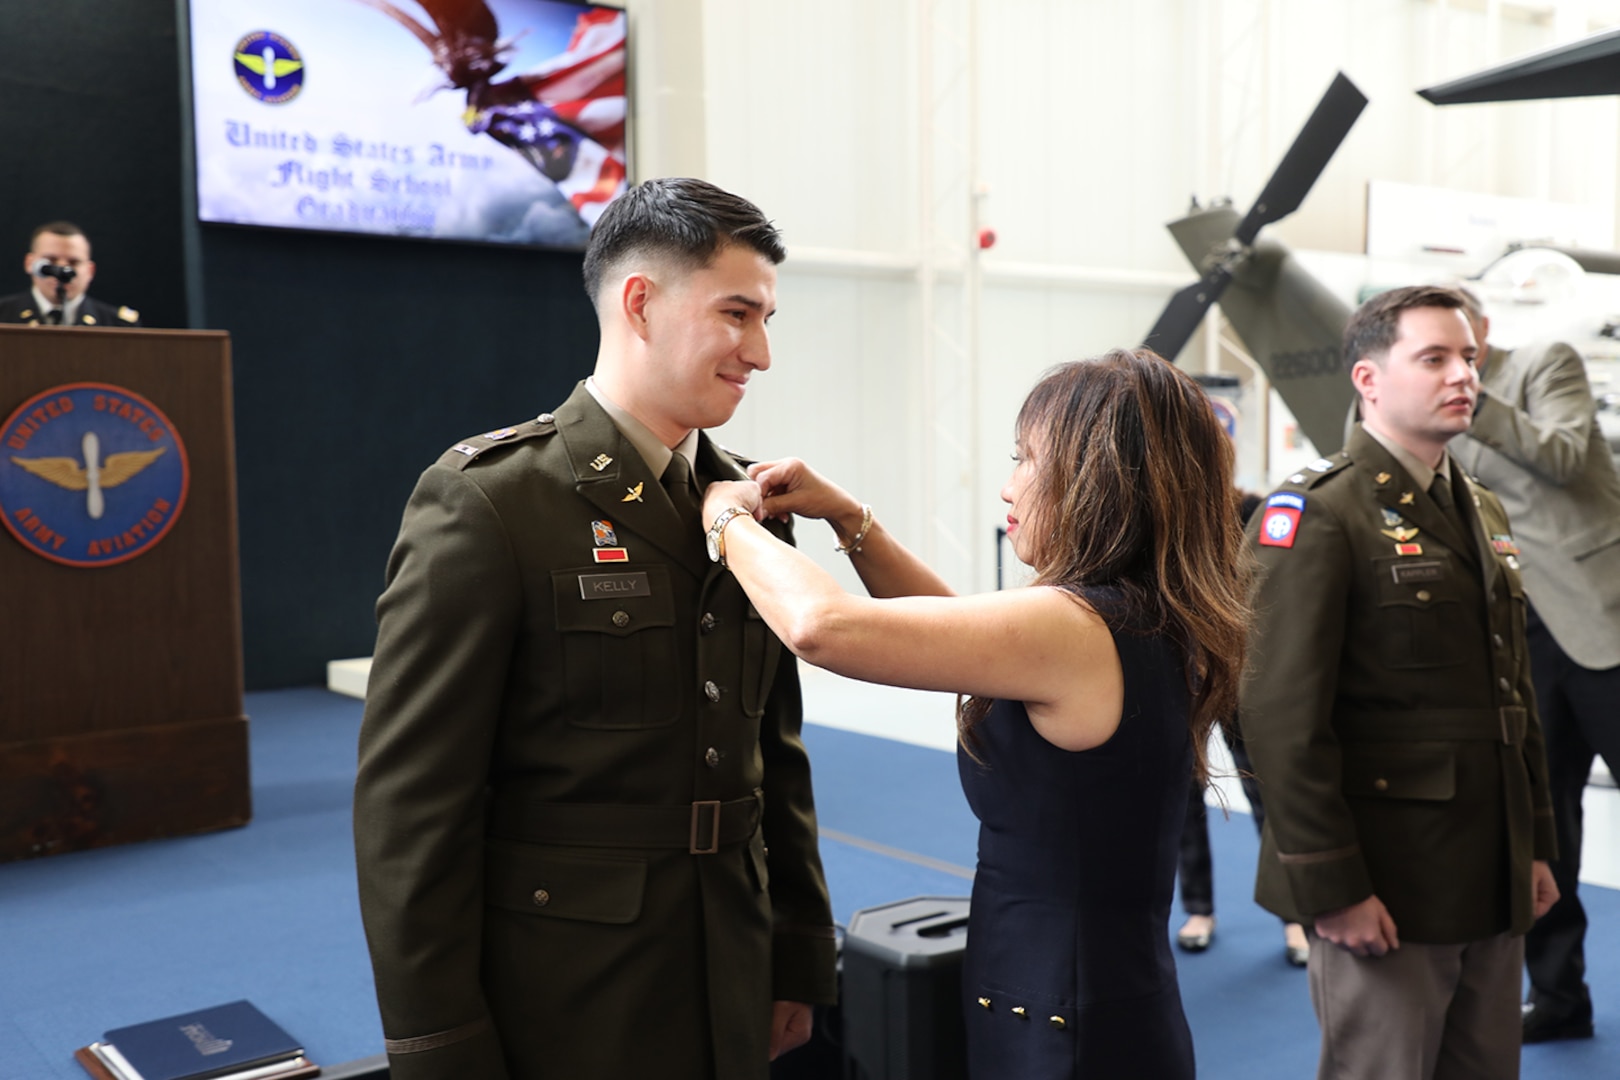 Warrant Officer Paul D. Kelly's mother, Maria, pins his silver wings on his uniform as he graduates flight school as a Black Hawk pilot at Fort Novosel, Ala., Feb. 8, 2024. He serves with the Virginia Army National Guard.